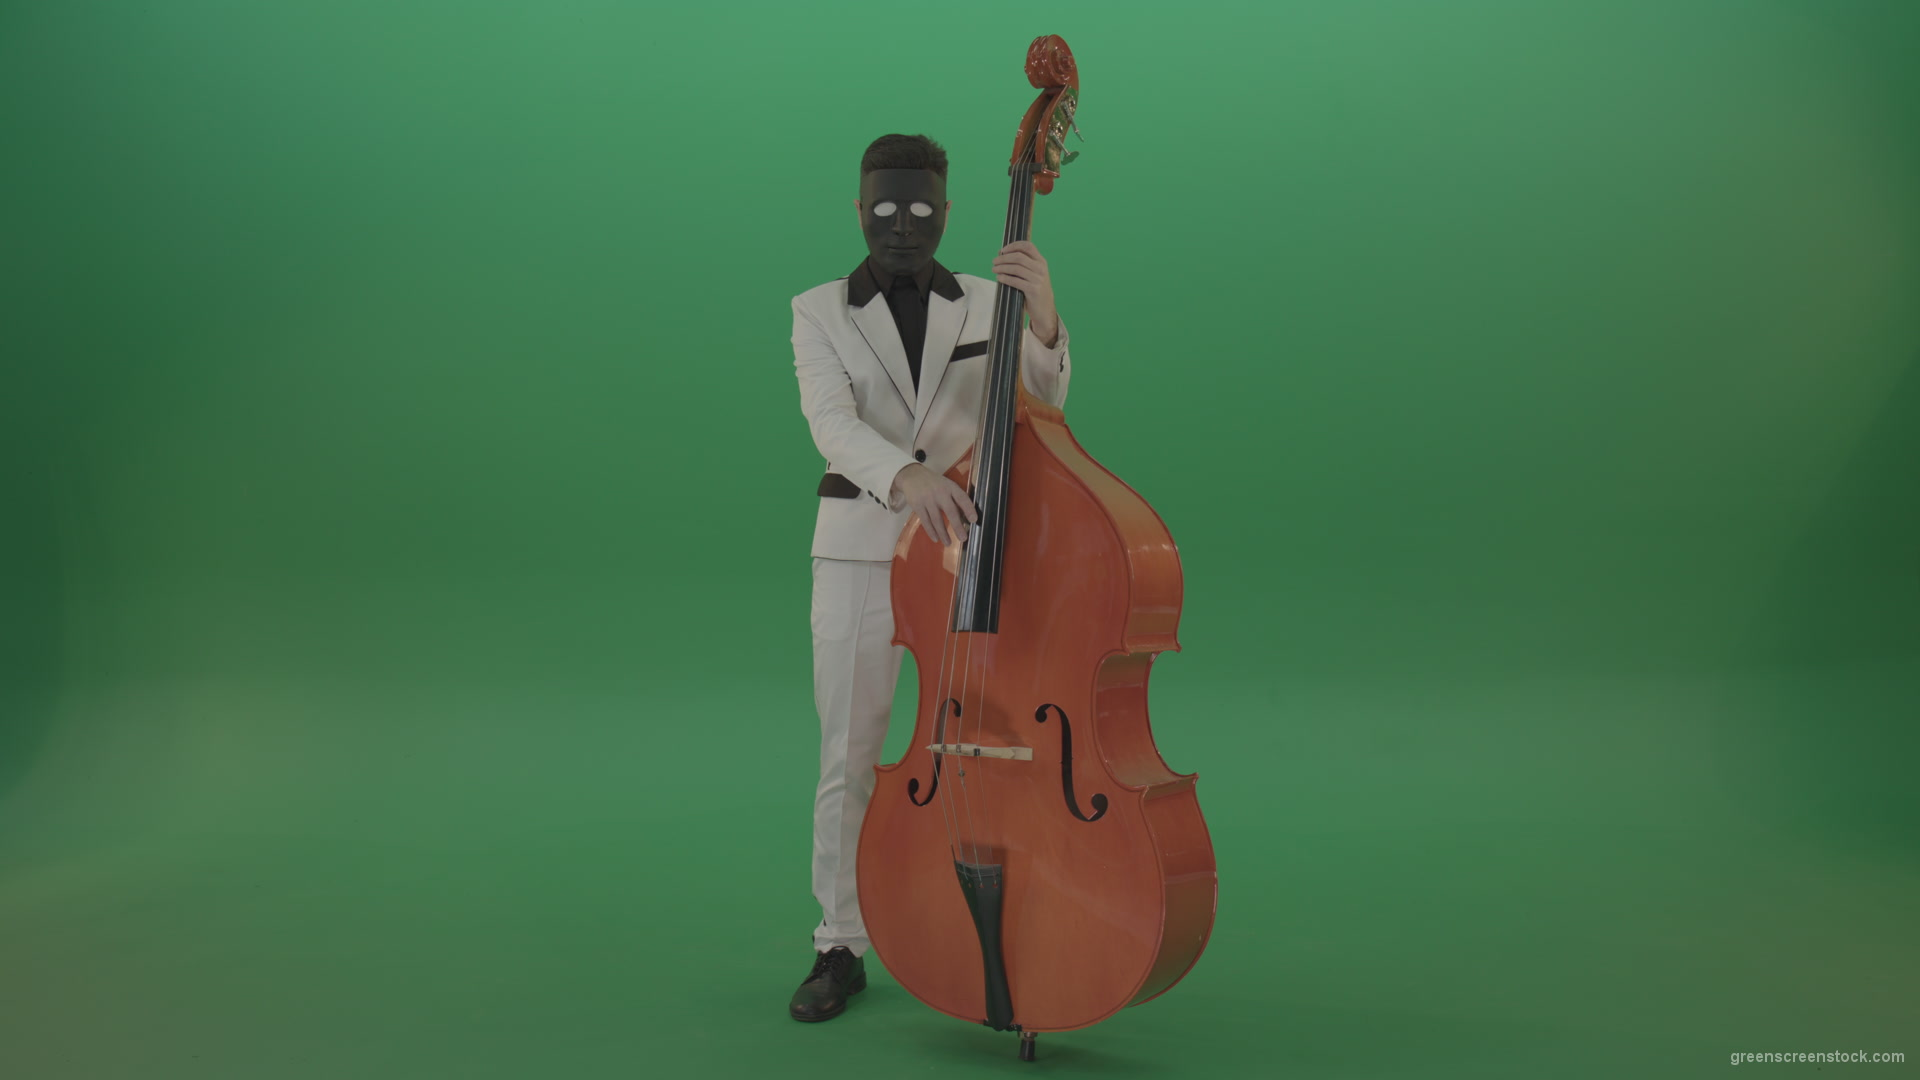 Man-in-white-costume-and-blac-mask-play-jazz-music-on-double-bass-orchestra-music-instument-isolated-on-green-screen_001 Green Screen Stock